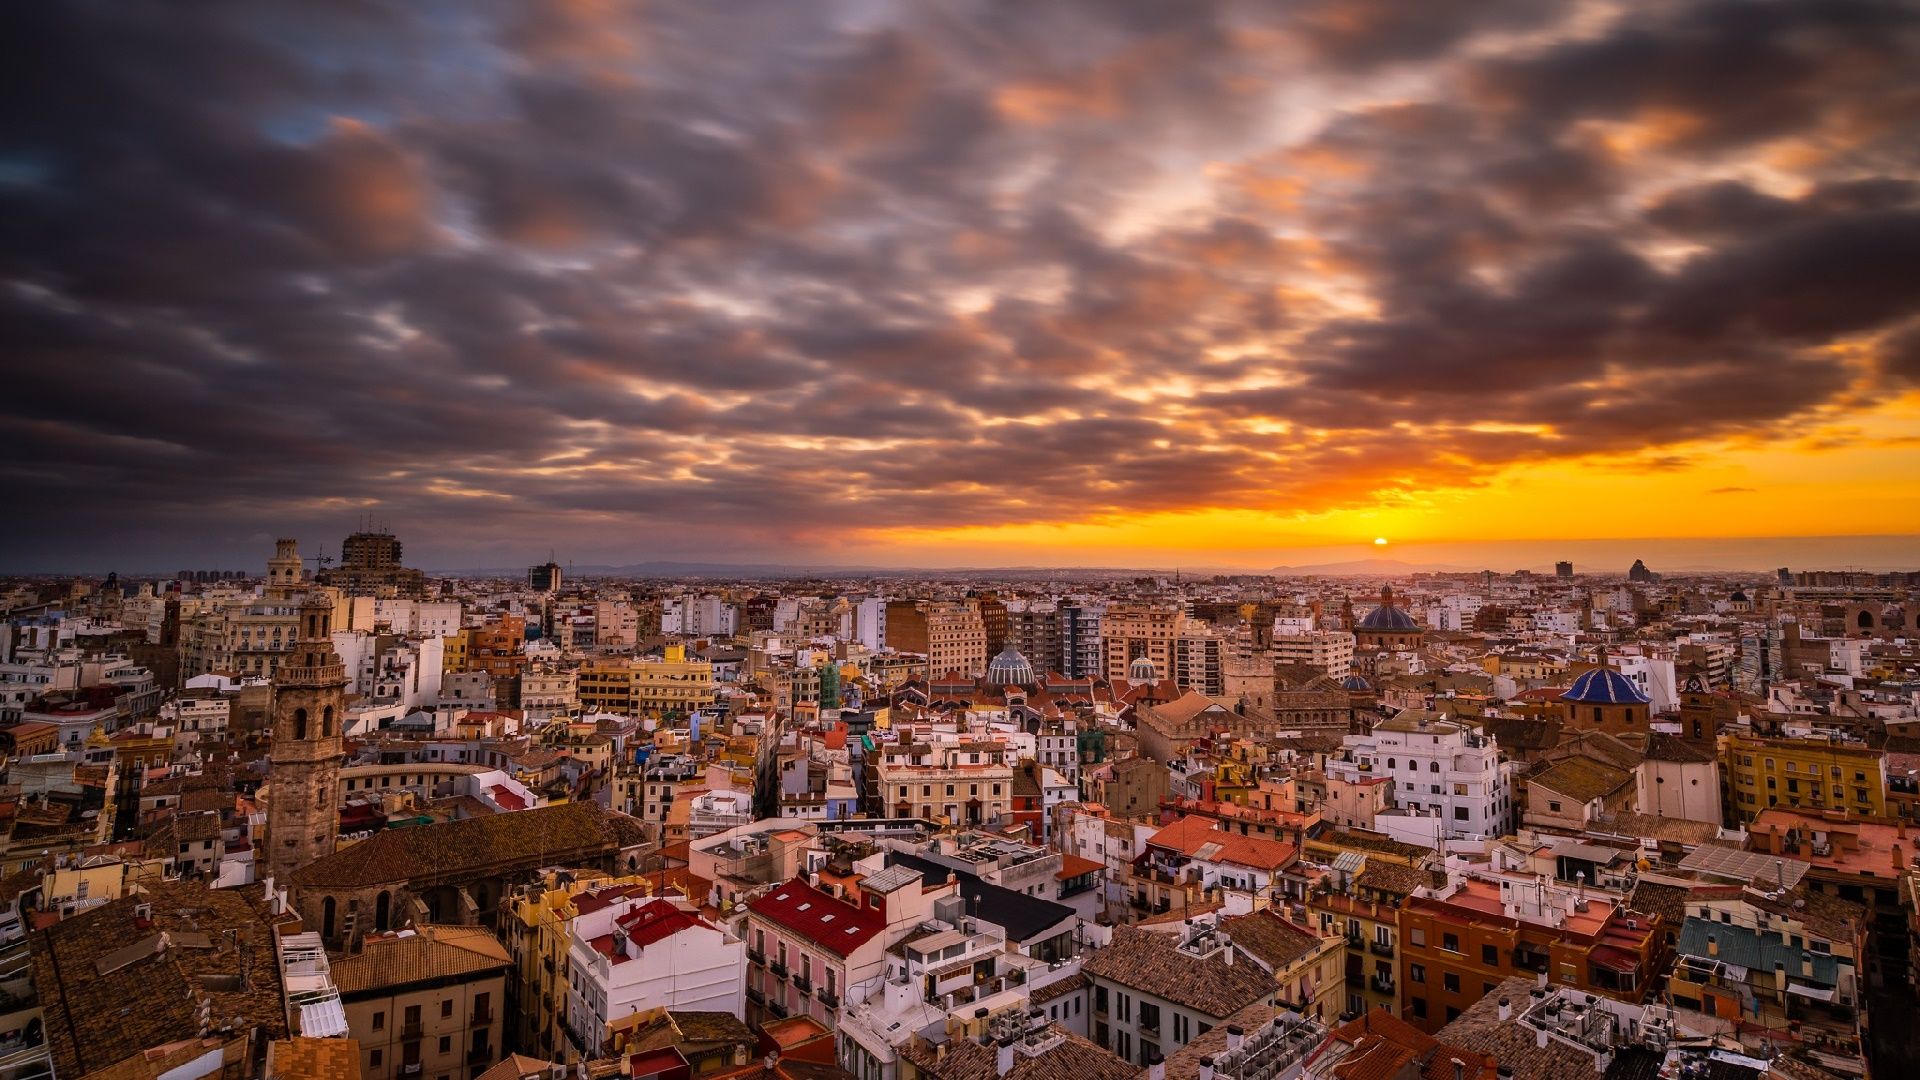 Valencia Spain Wallpapers 4k Hd Valencia Spain Backgrounds On